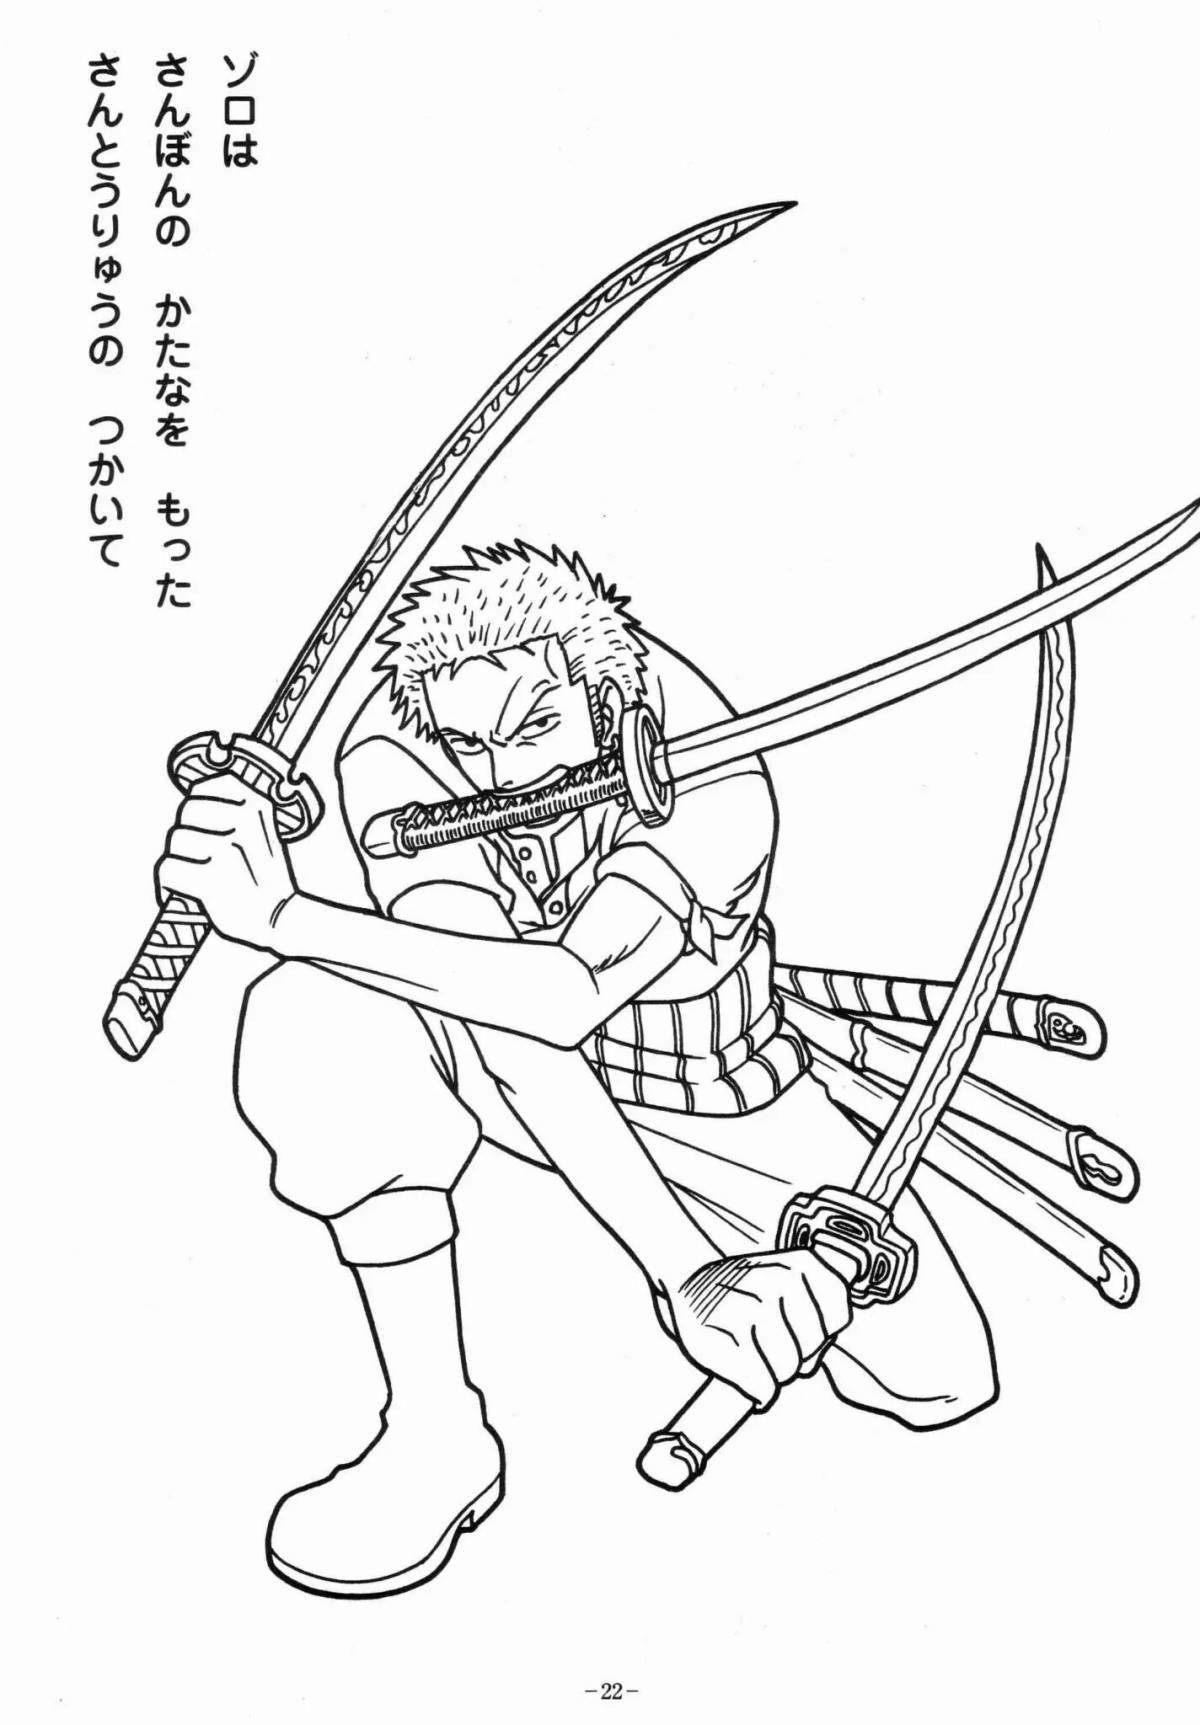 Glamorous zoro one piece coloring book